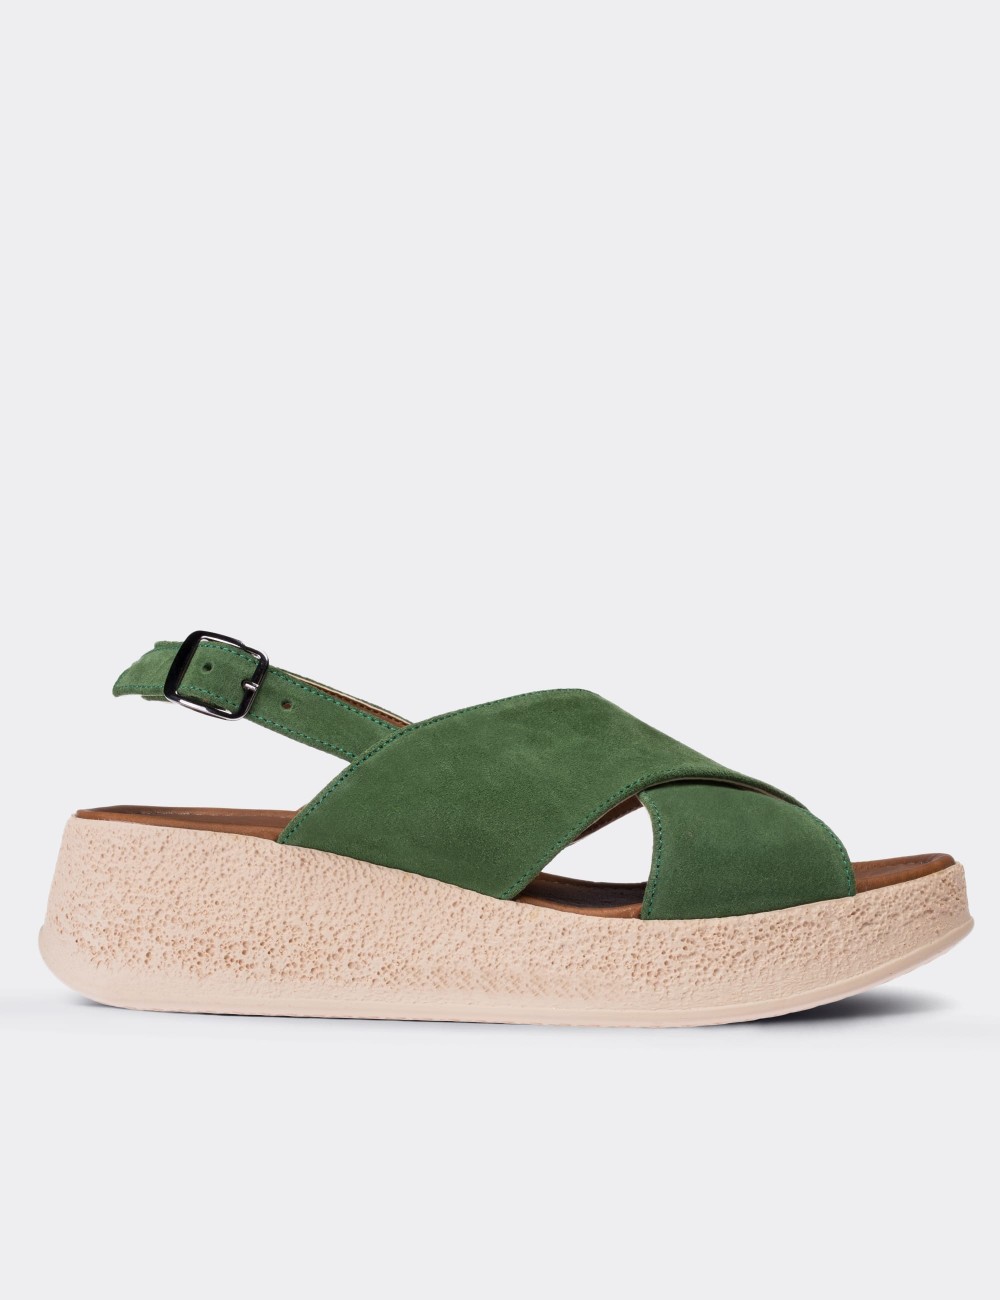 Green Suede Leather  Sandals - 02126ZYSLP01